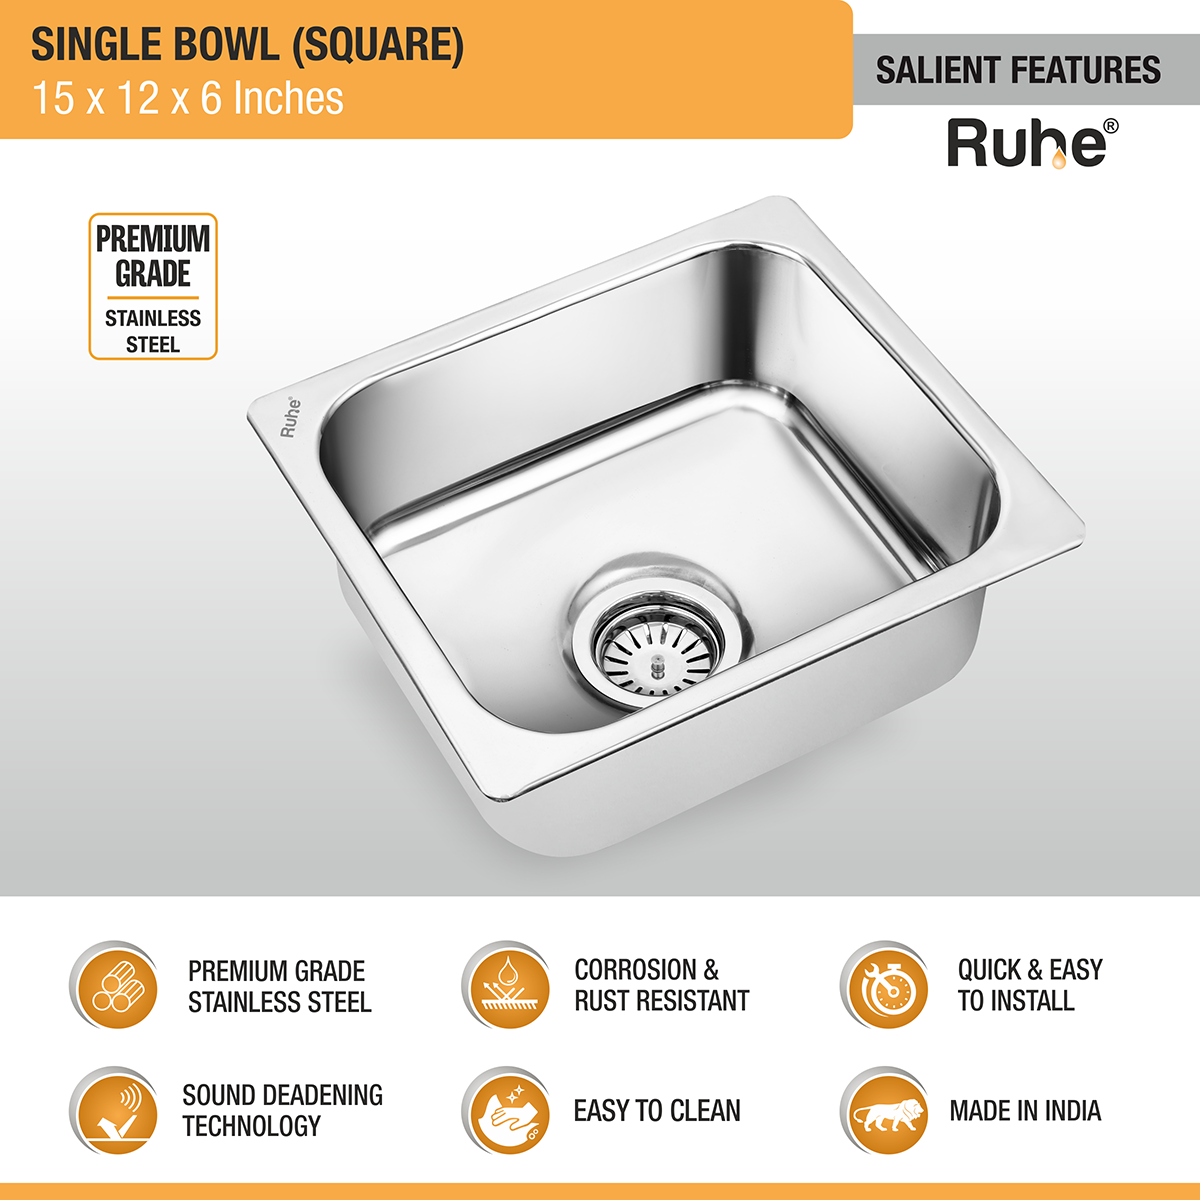 Square Single Bowl Kitchen Sink (15 x 12 x 6 inches) features and benefits